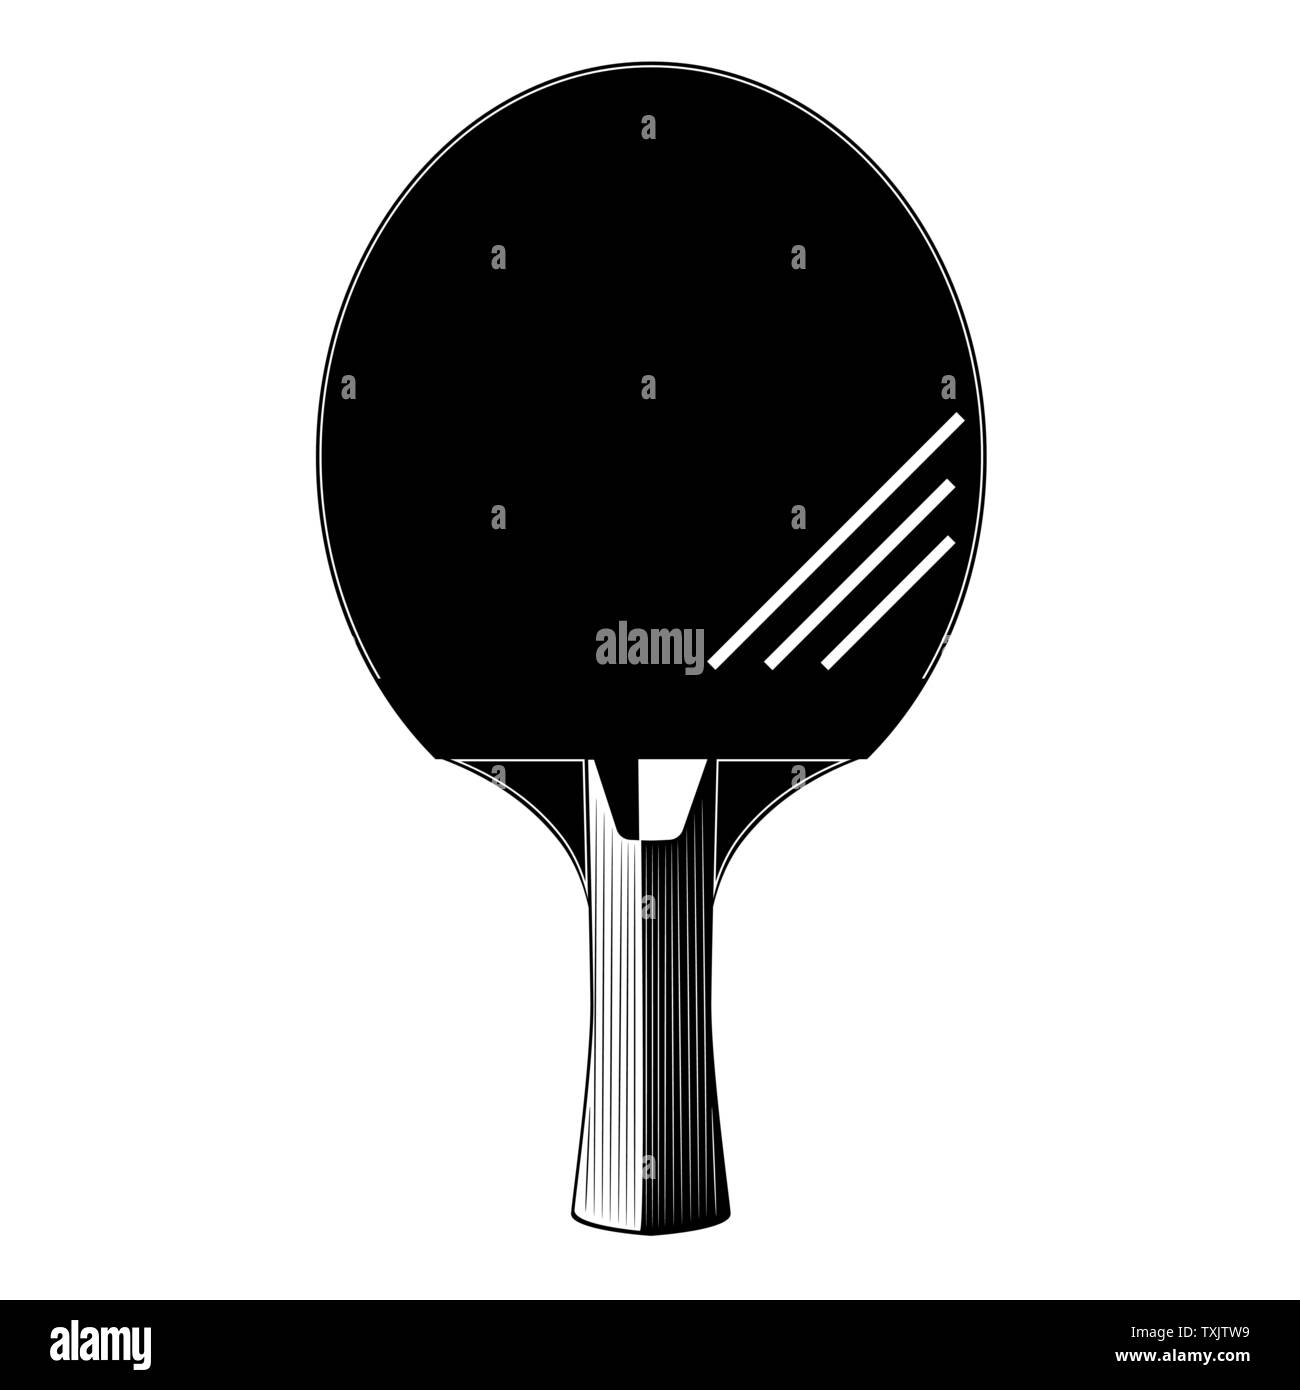 Table tennis or ping-pong racket silhouette, vector illustration Stock Vector